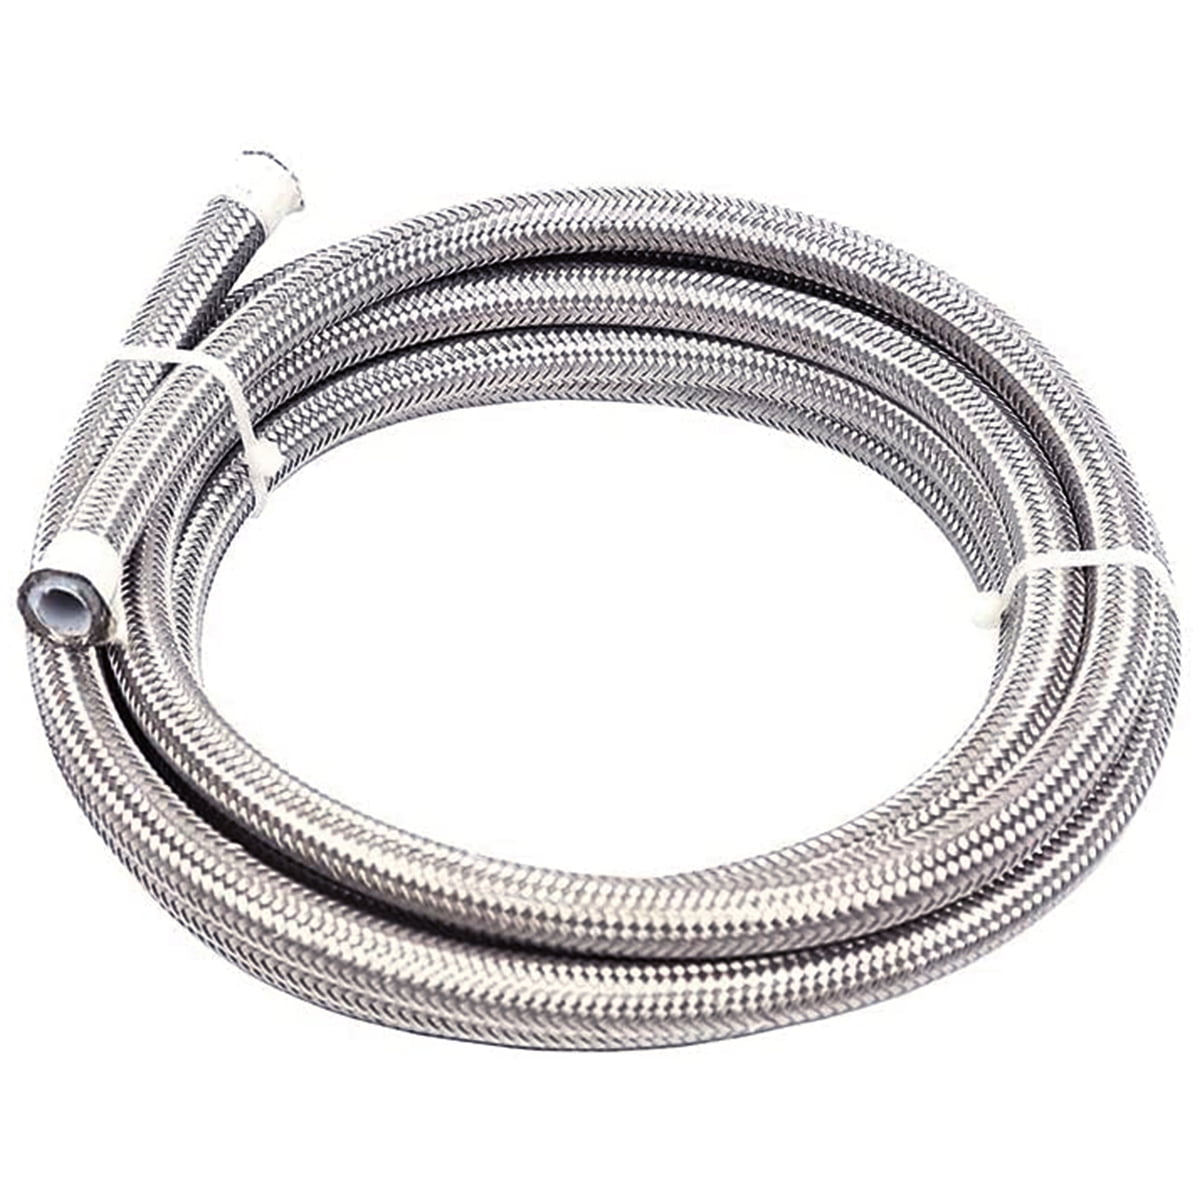 IXTIX 1m 6AN Fuel Line Hose AN6 5/16 Stainless Steel Braided Fuel Hose  Durable CPE Oil Gas Cooler Hose 5/16“Universal CPE Tube Oil Fuel Gas Hose  Transmission Cooler Lines Hose 